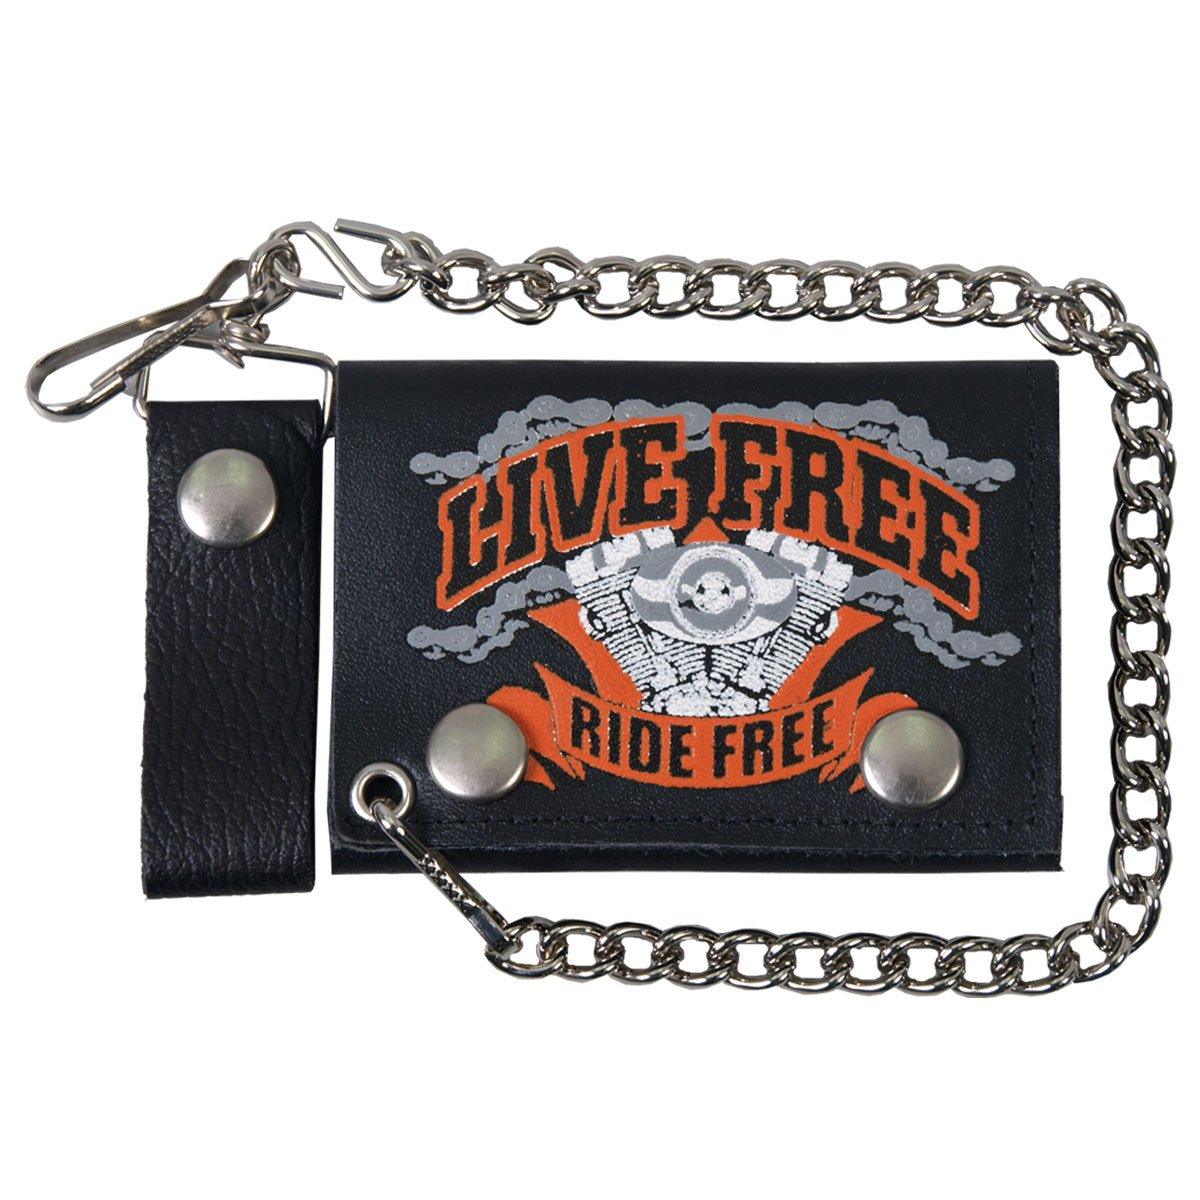 Hot Leathers Live Free Leather Wallet - American Legend Rider